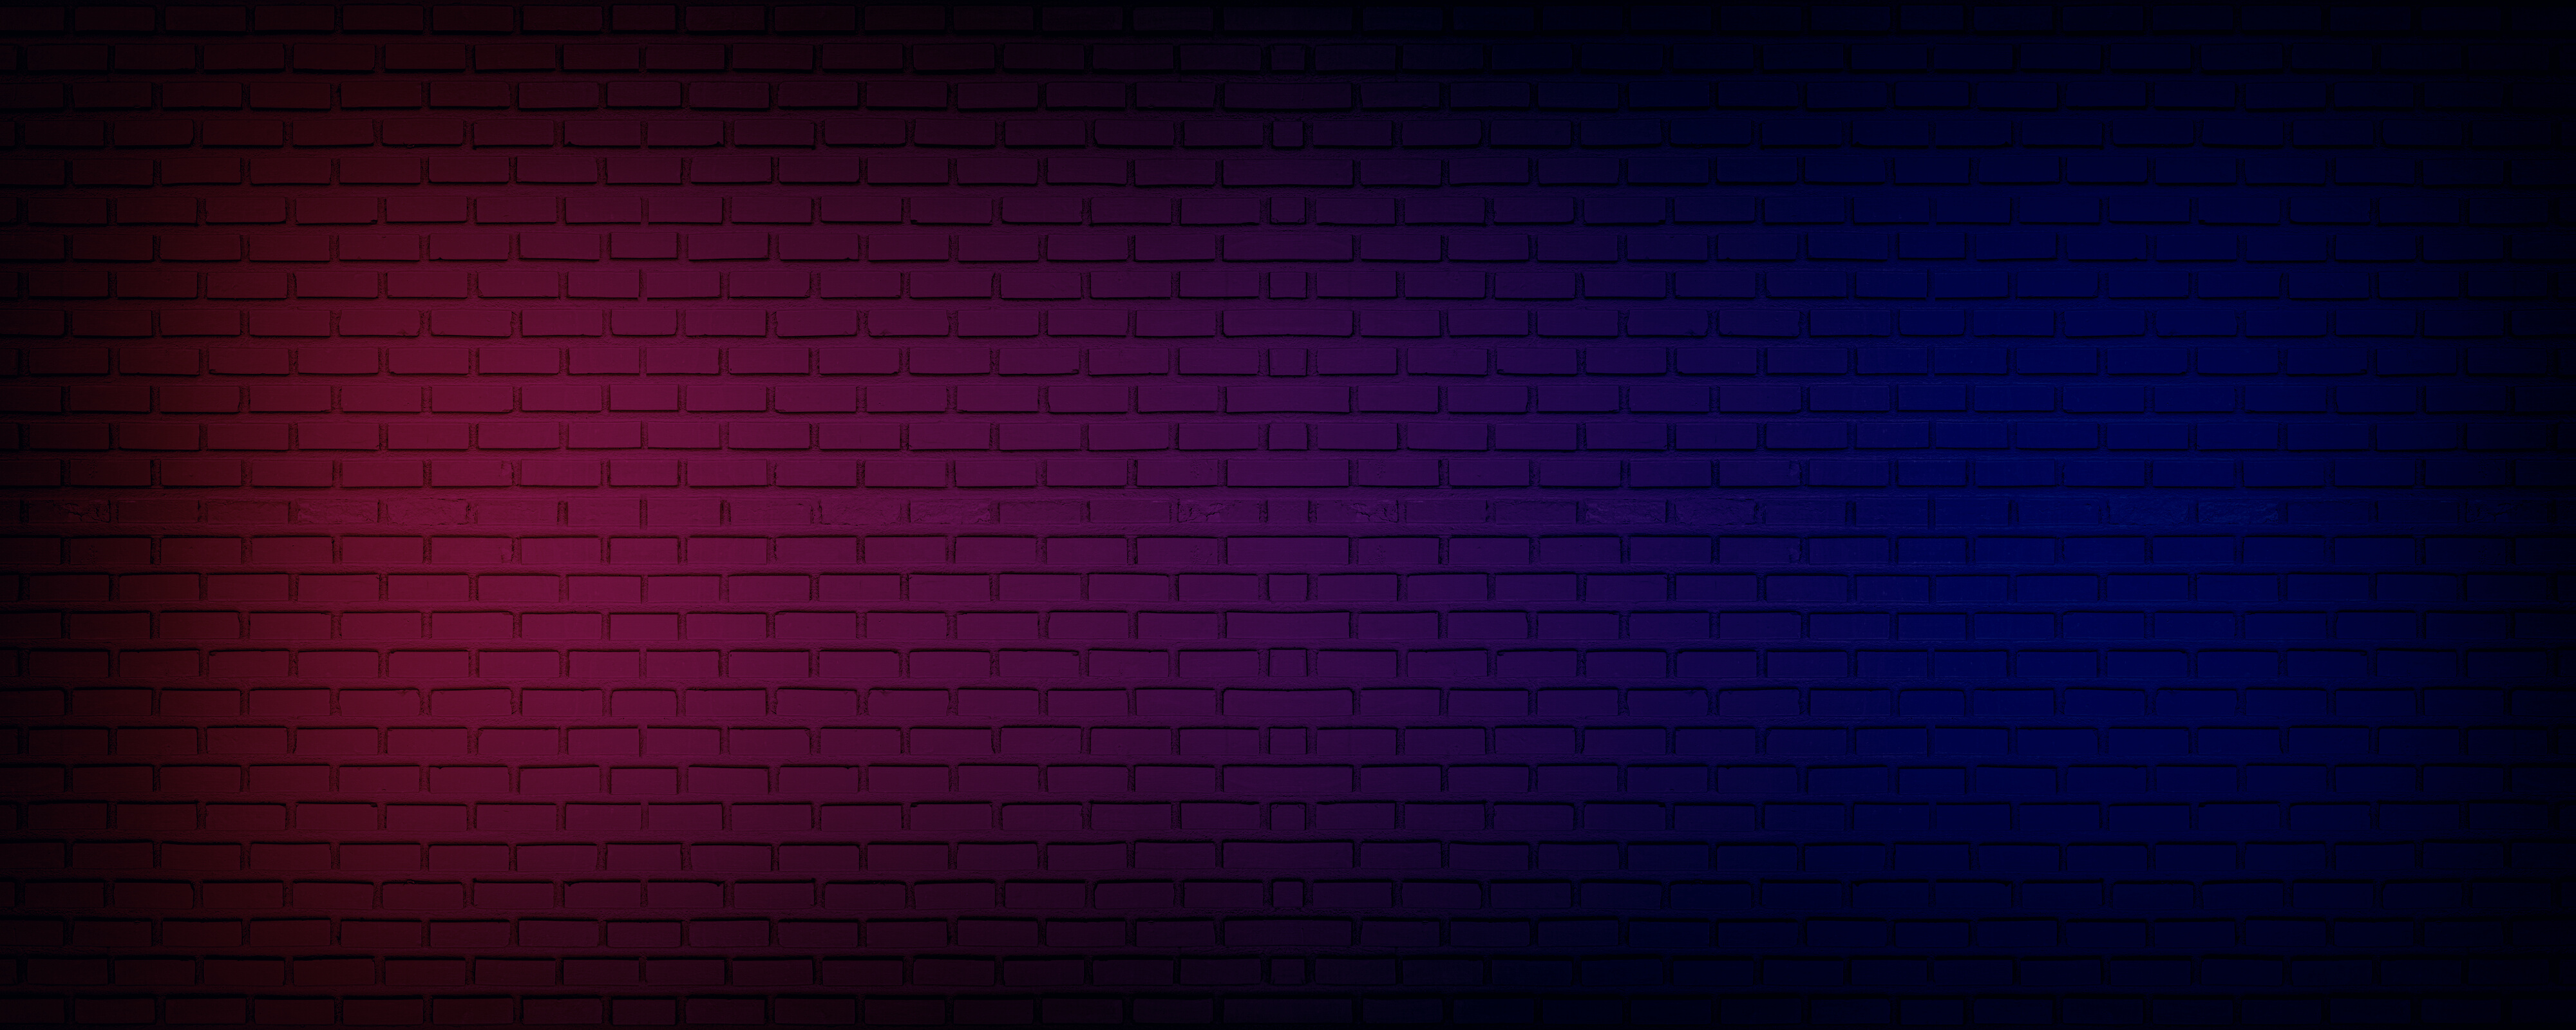 Neon light on brick wall texture as background